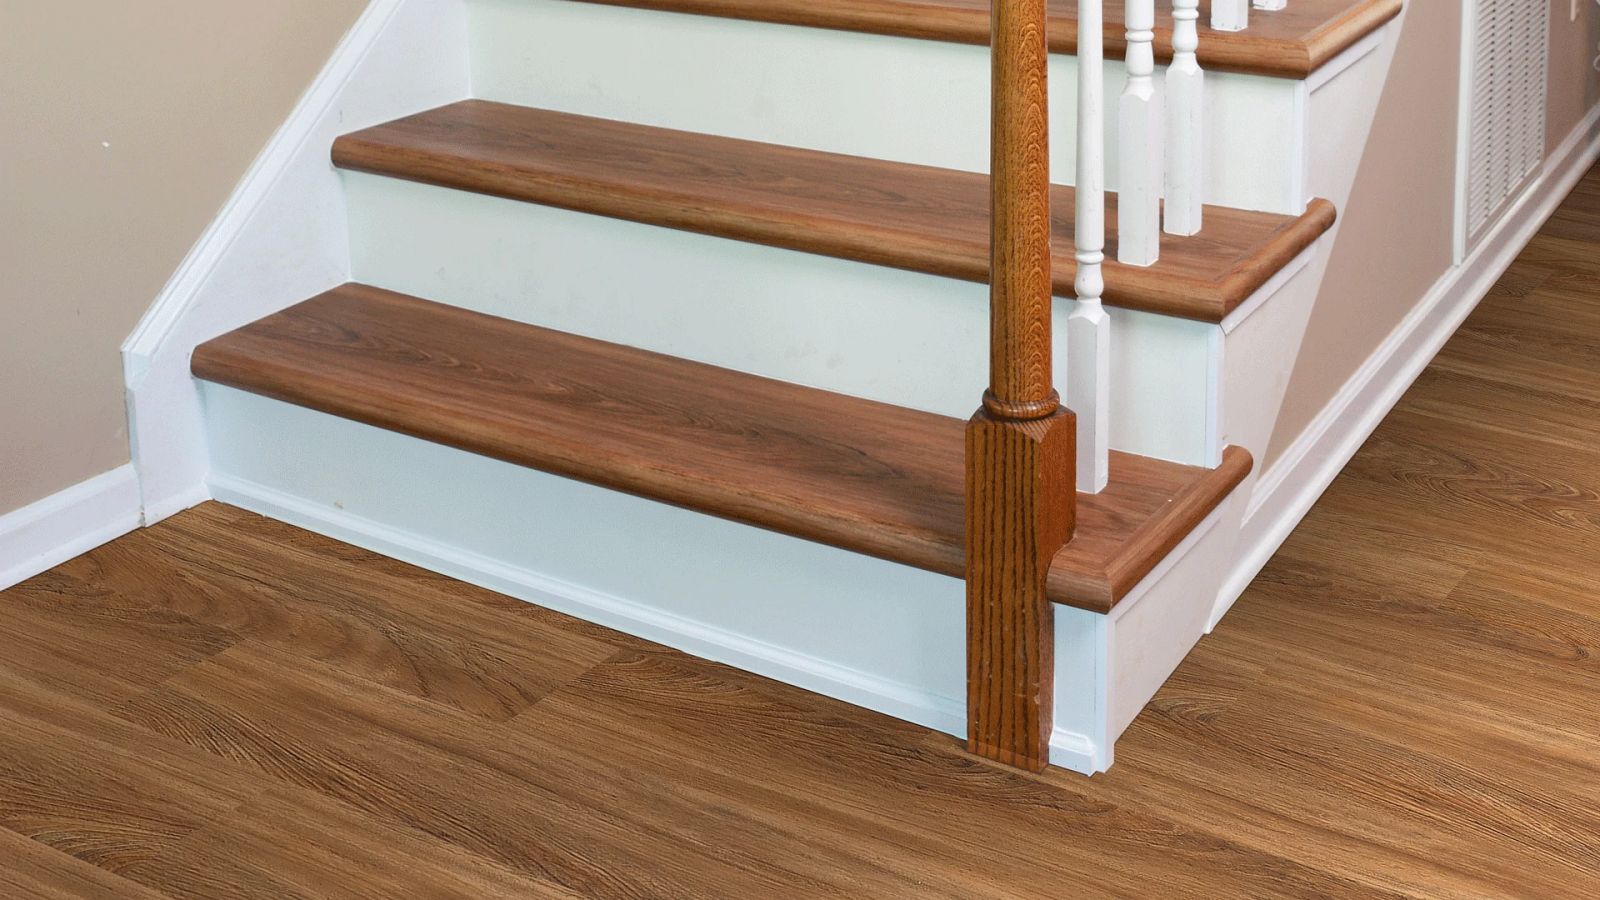 Shaw Floors, Can You Lay Vinyl Flooring On Stairs